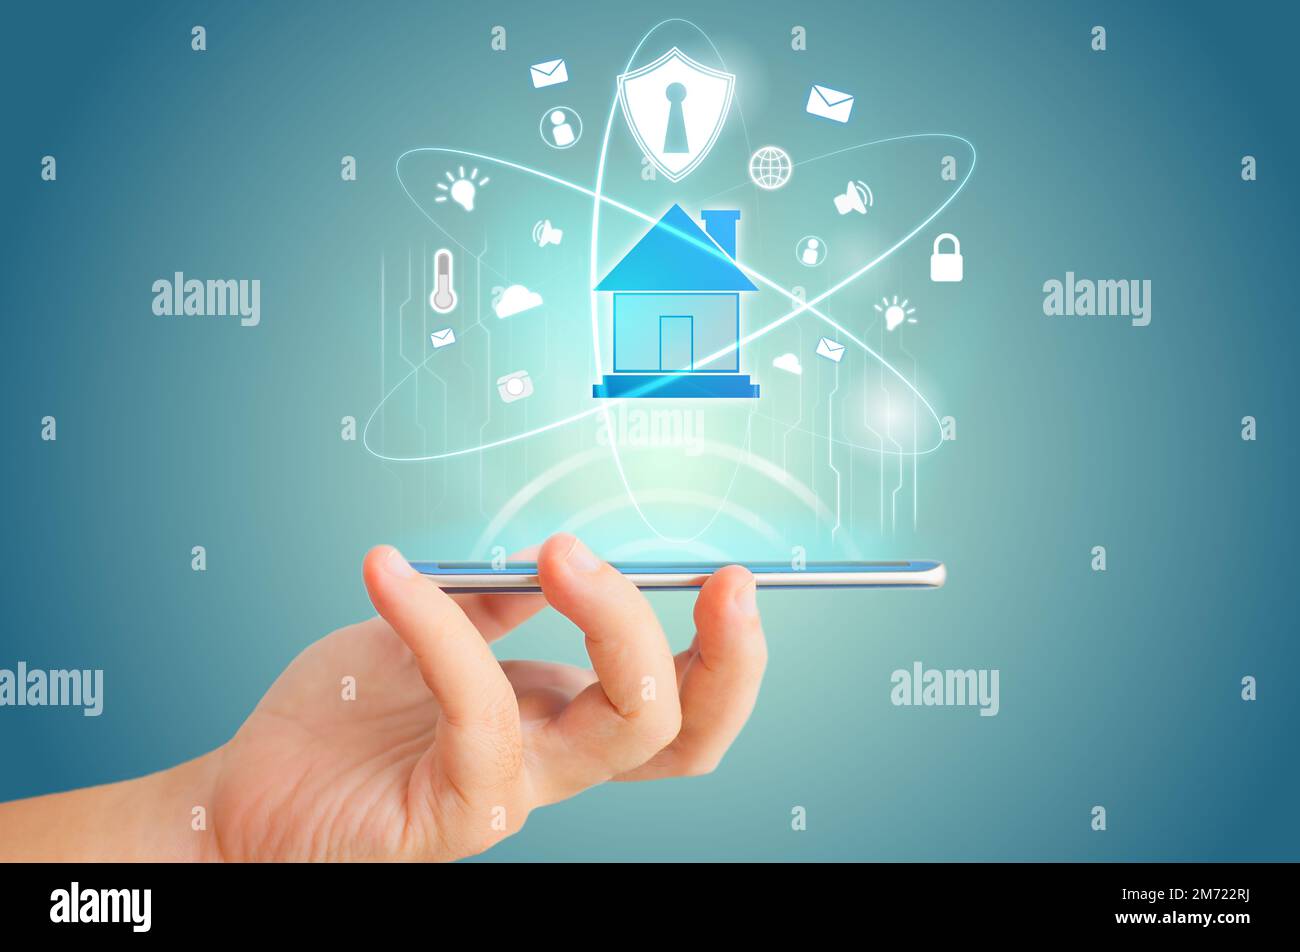 Smart phone remote for smart home hologram technology concept idea. Stock Photo